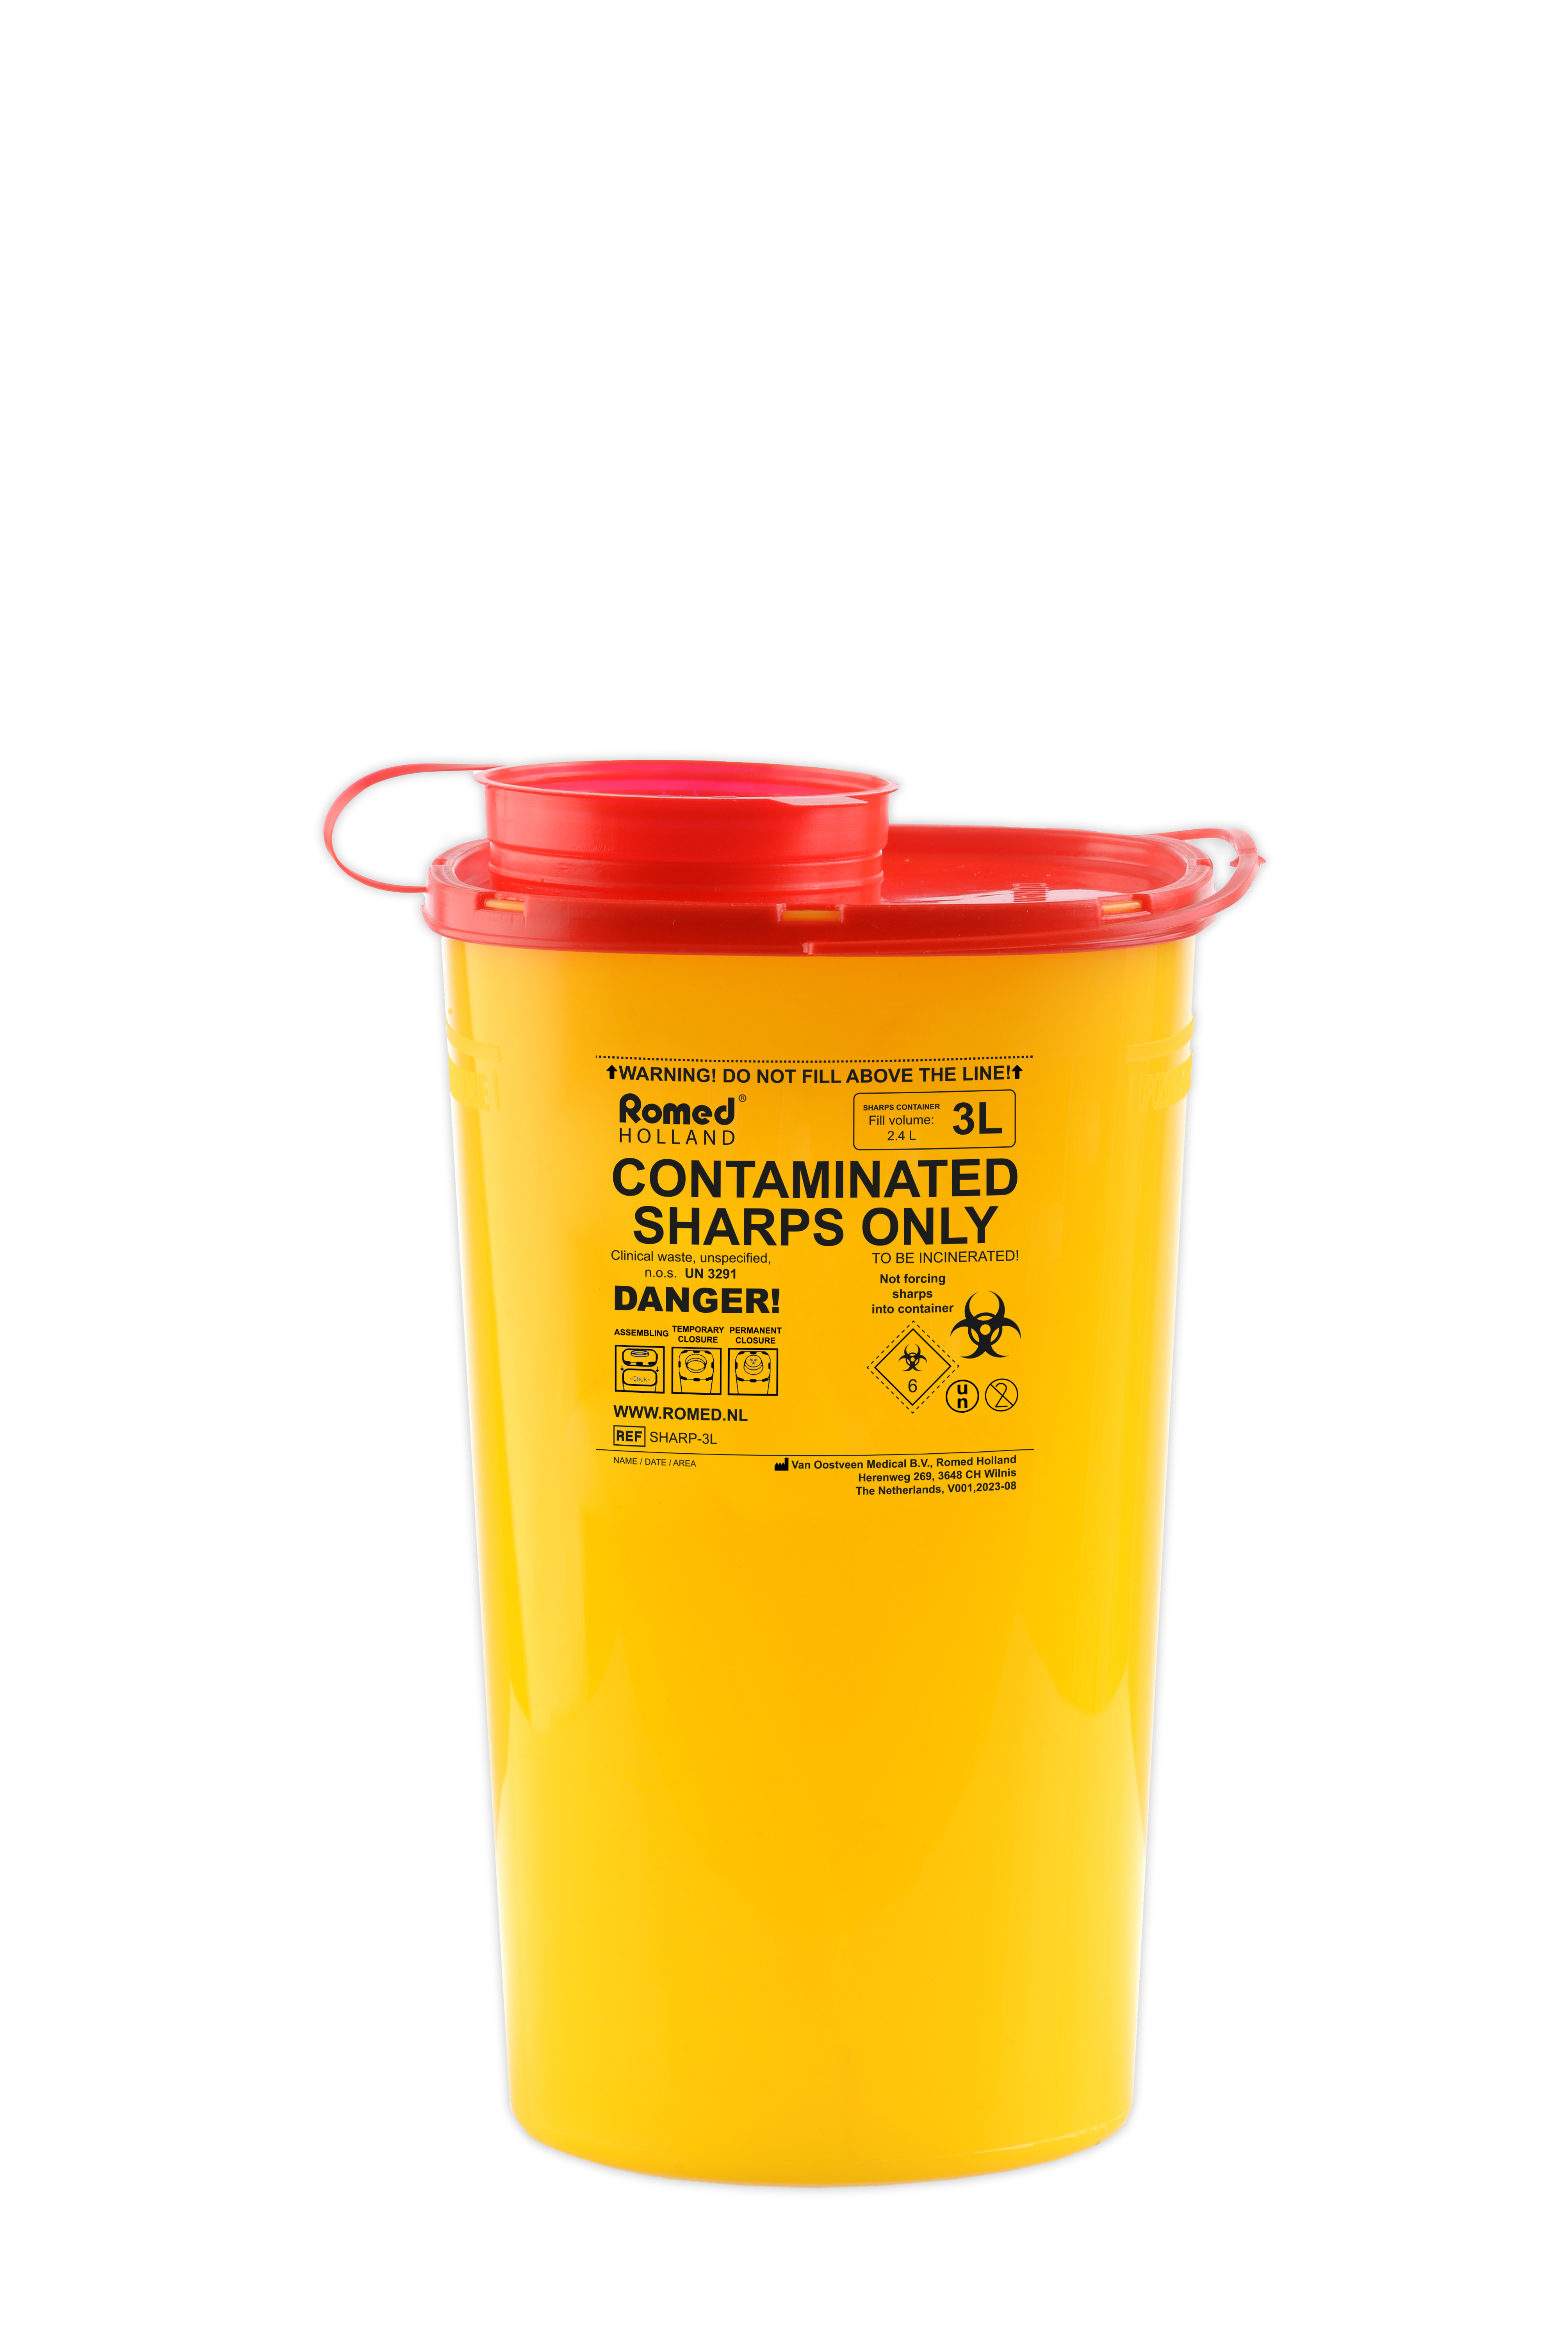 SHARP-3L Romed Sharp Container, for clinical waste, 3 liter, 54 pcs in a carton.